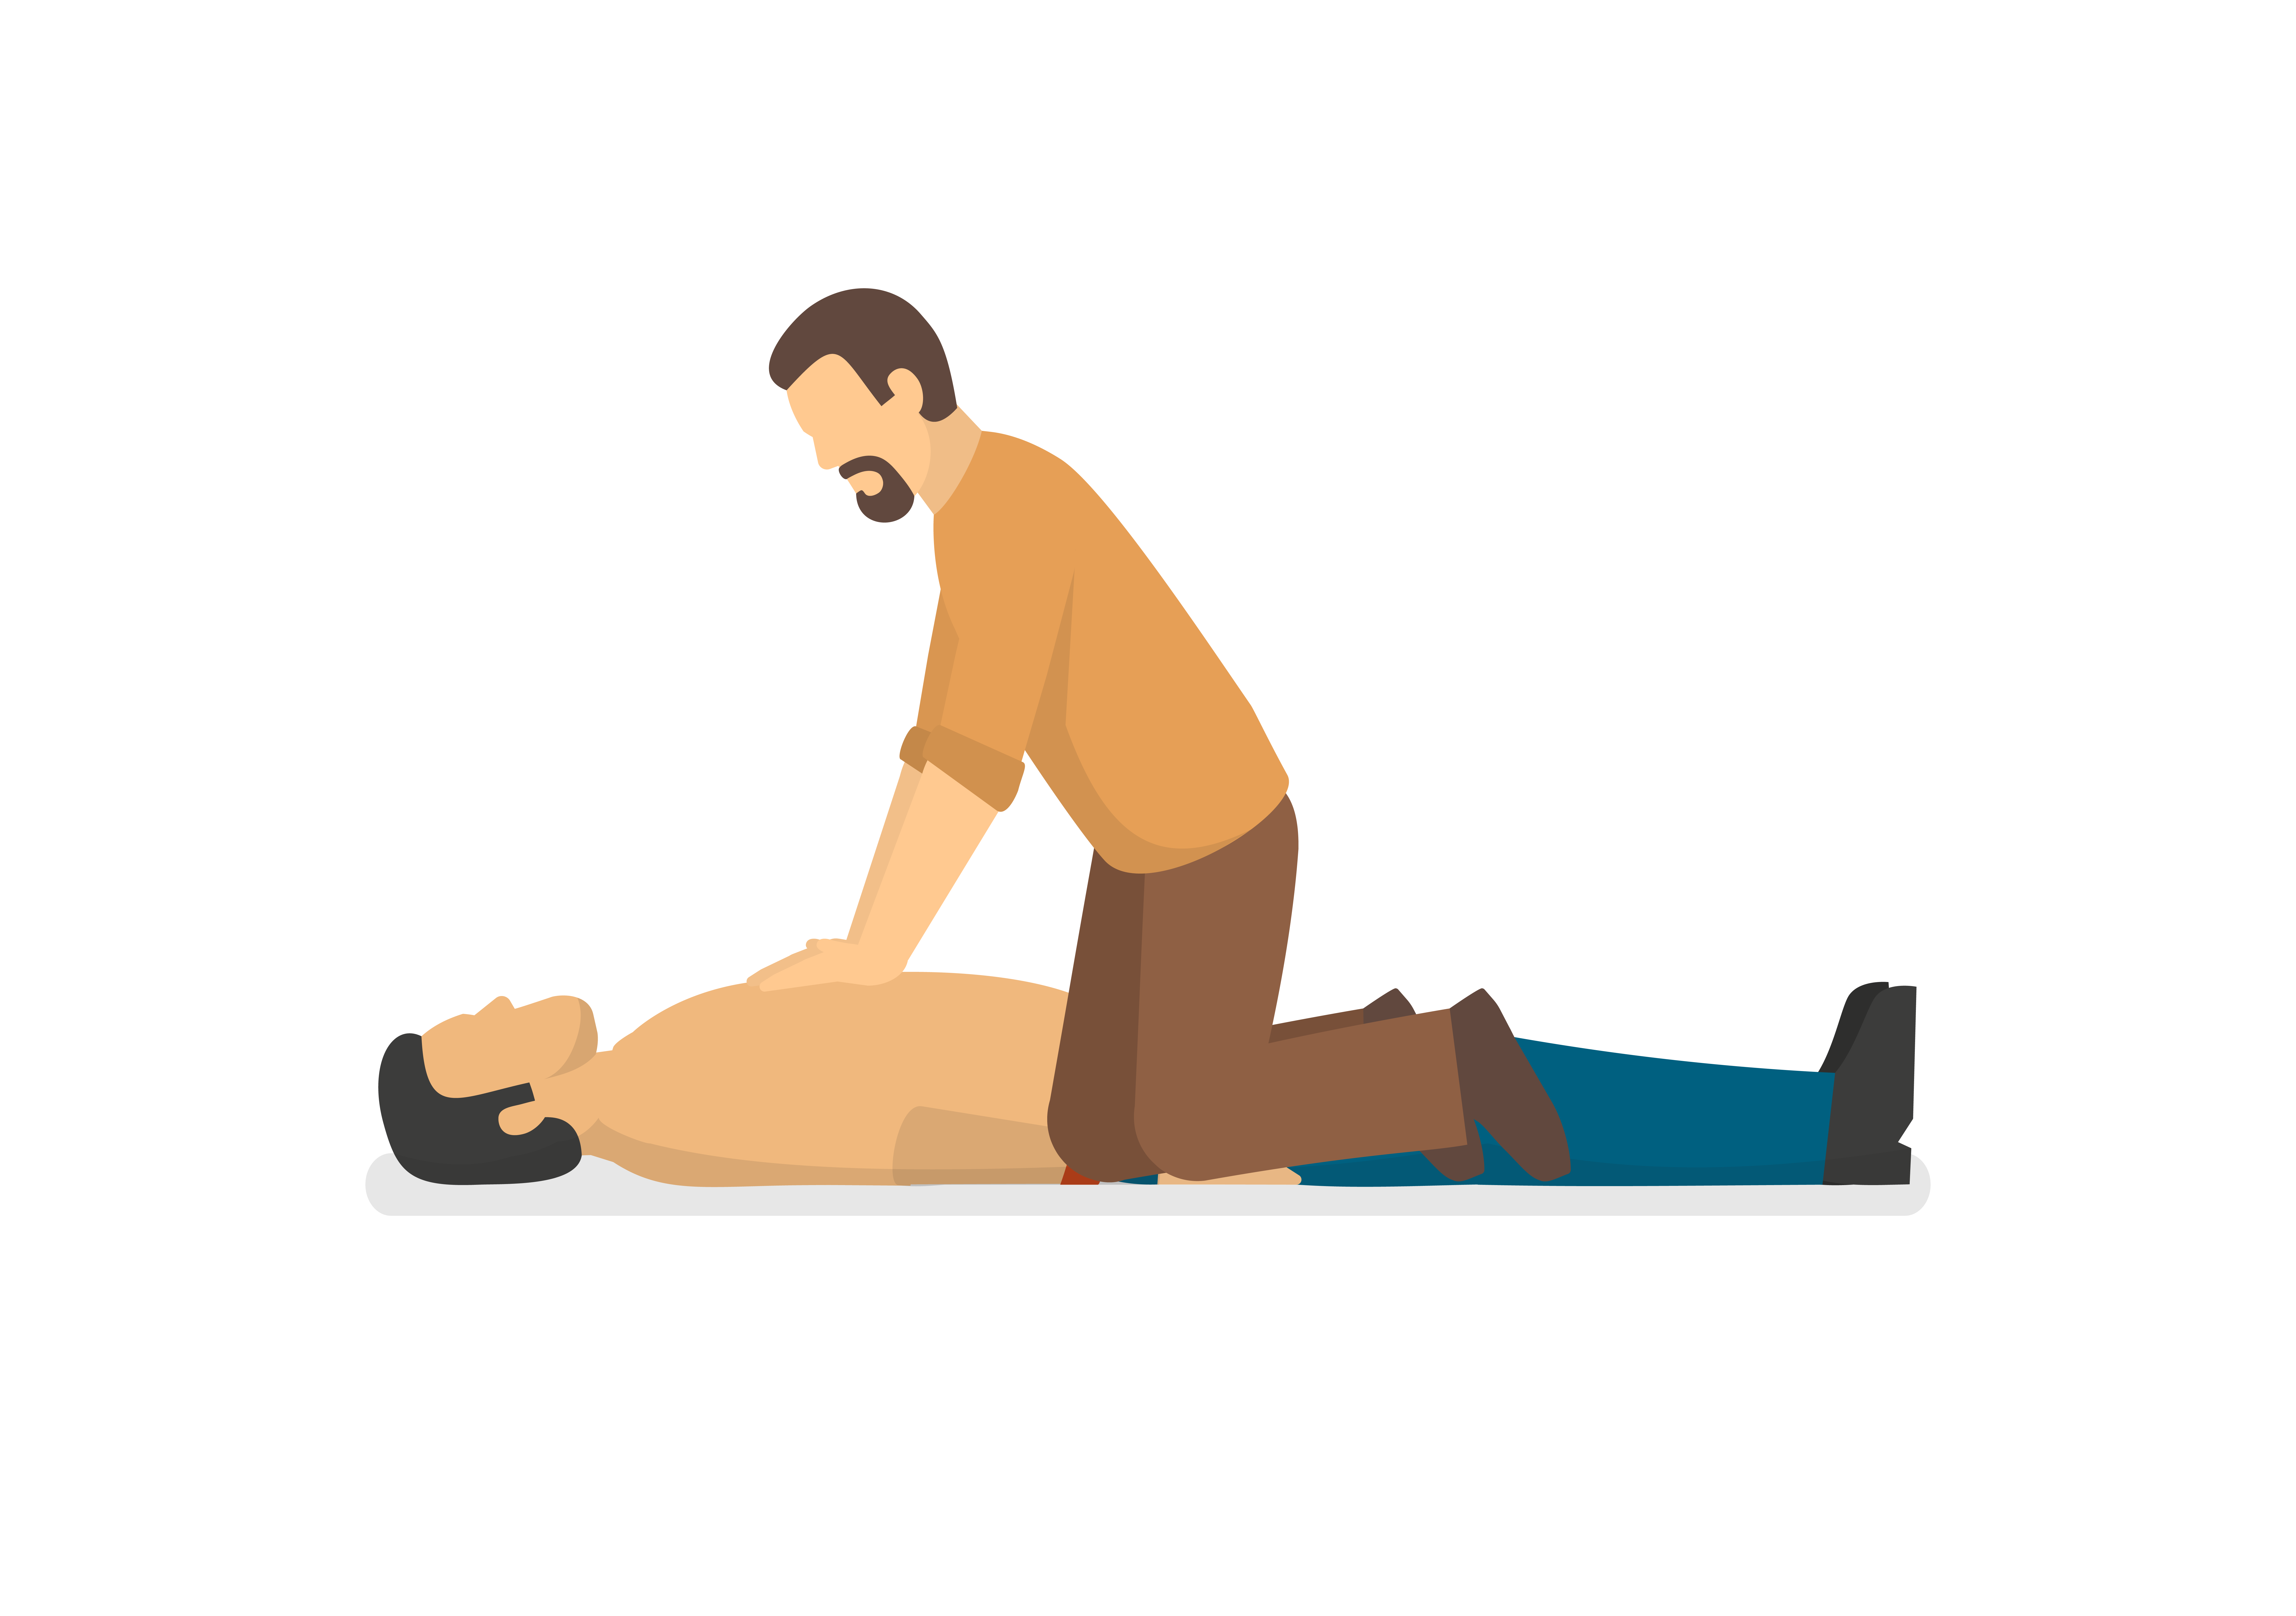 The basis of CPR is chest compressions